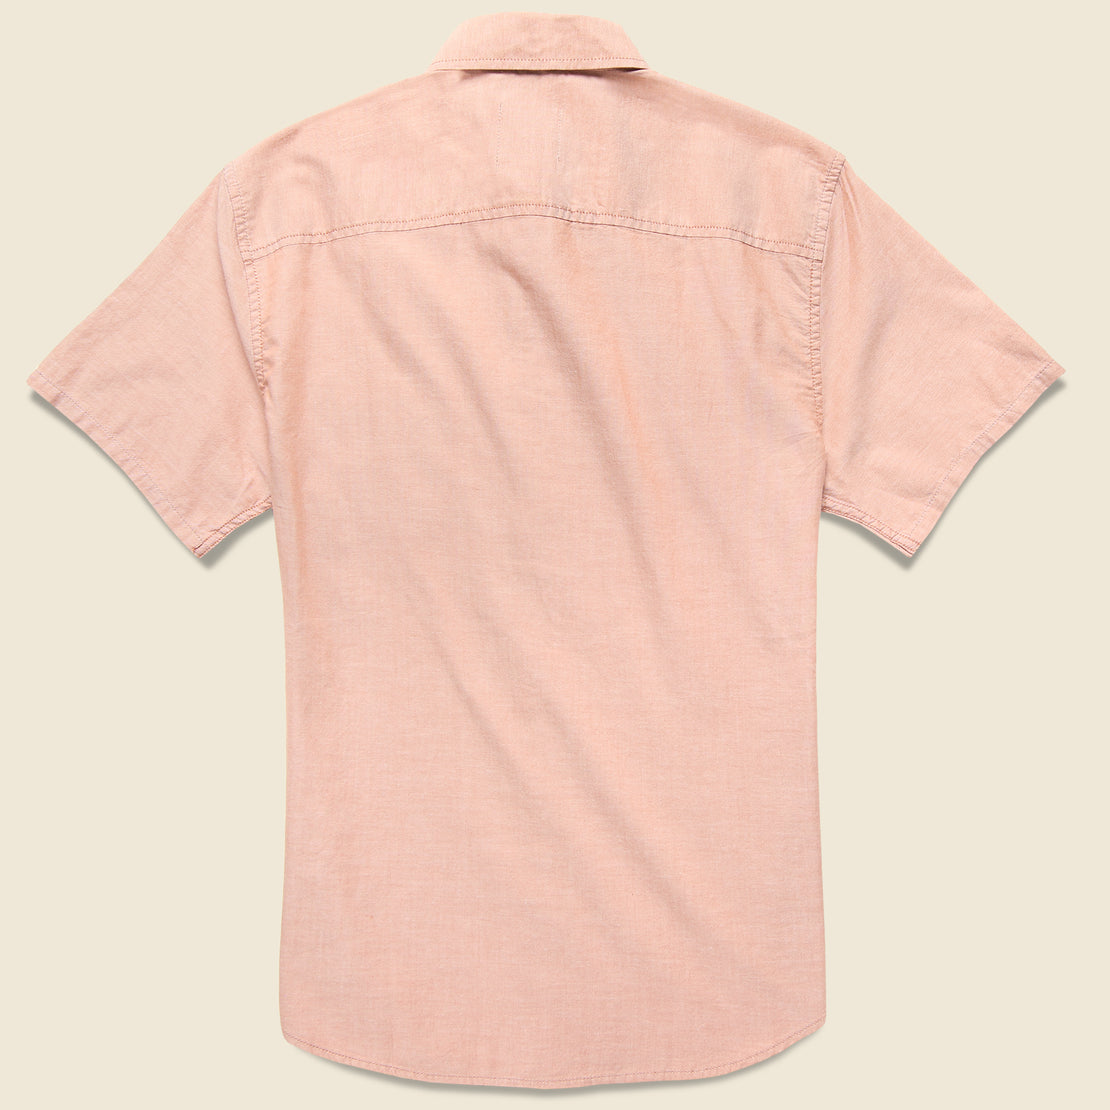 Oxford Shirt - Terra Cotta - Life After Denim - STAG Provisions - Tops - S/S Woven - Solid